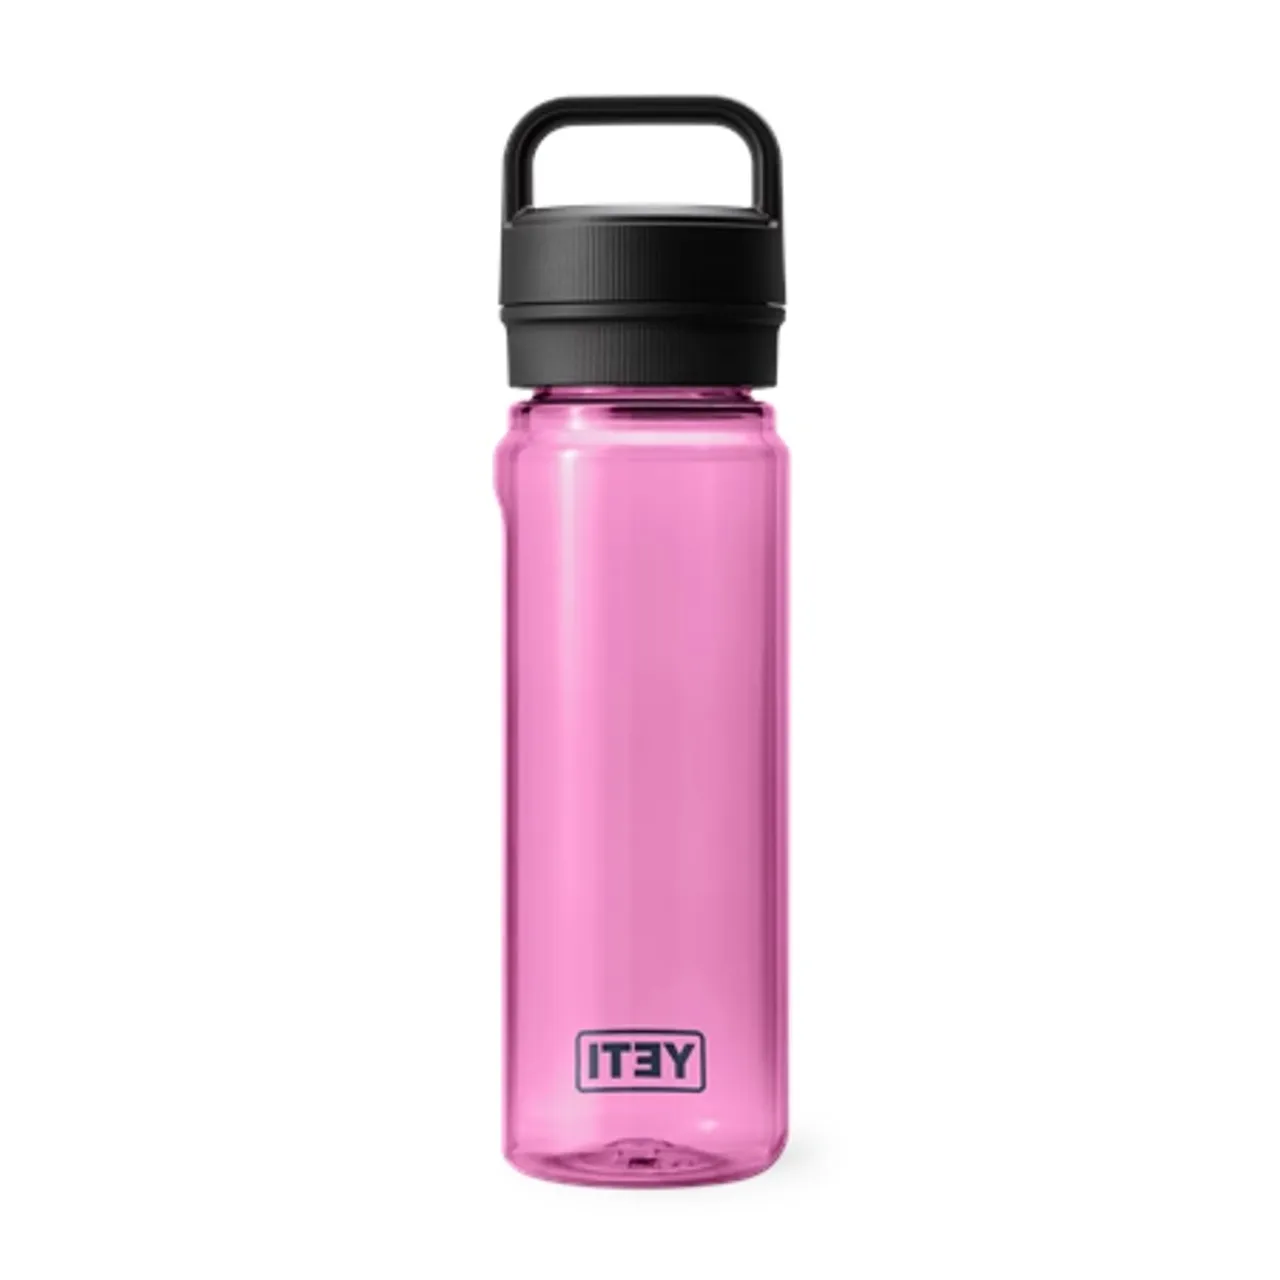 Yeti Yonder 750ml Water Bottle With Tether Cap - Power Pink - O/S